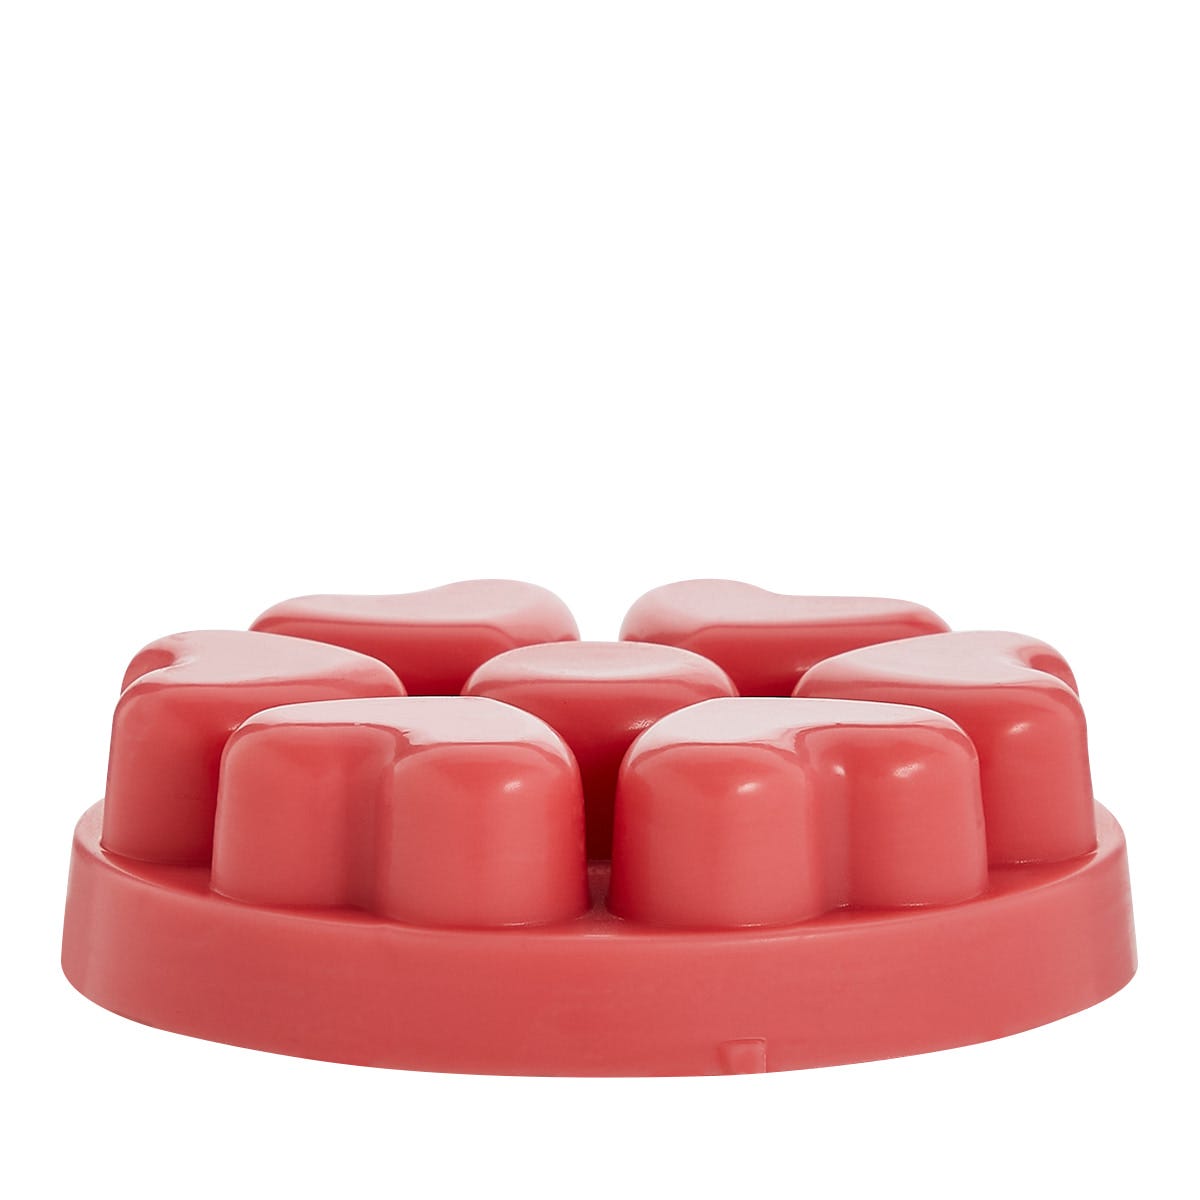 Strawberry Fields Scent Plus® Heart Melts - PartyLite US